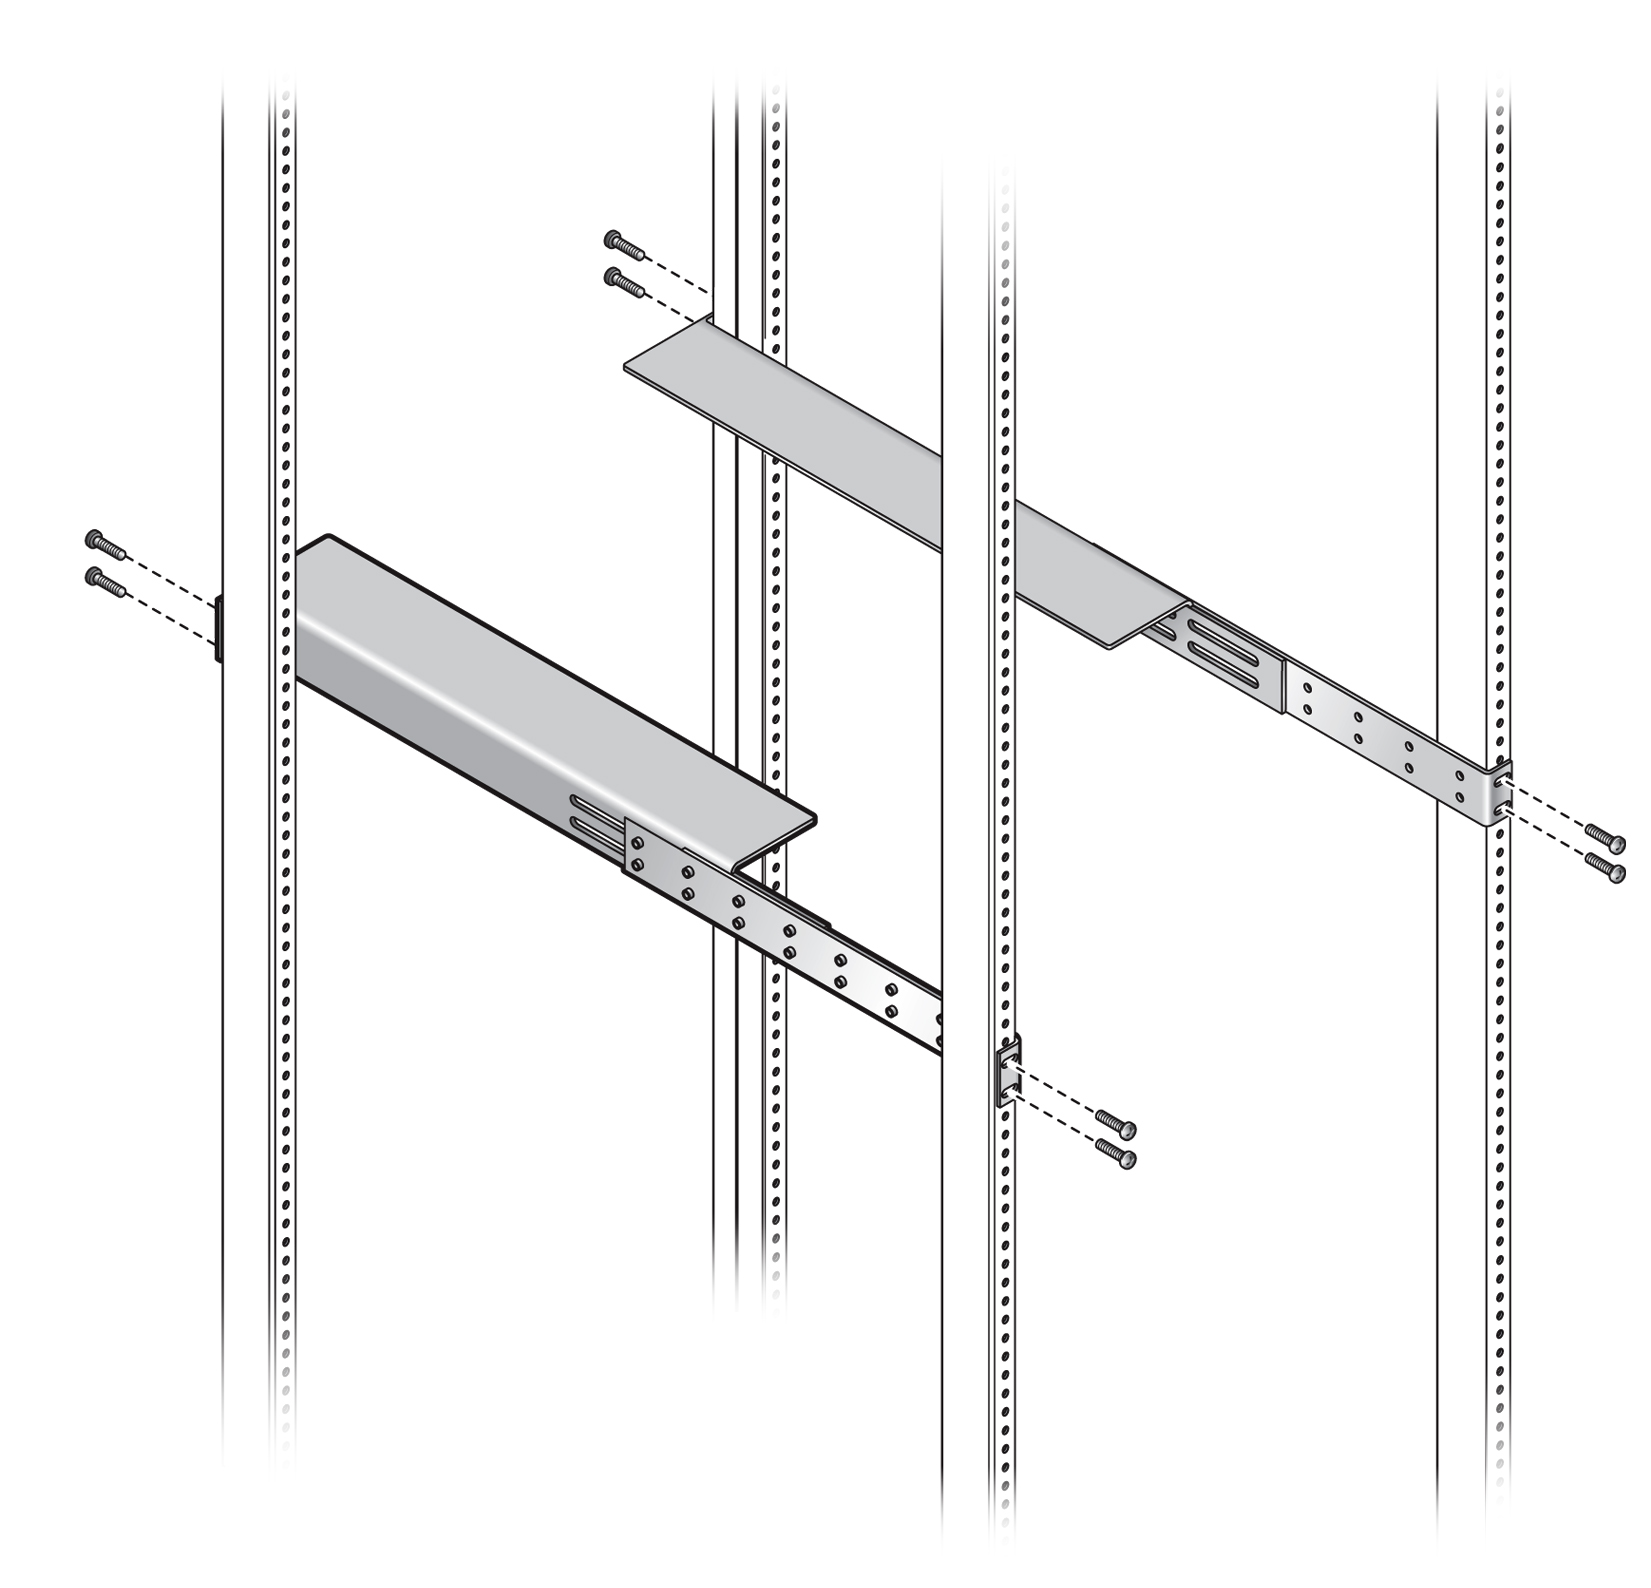 image:Figure shows the rack mount rails are attached with two                                     screws at each end.